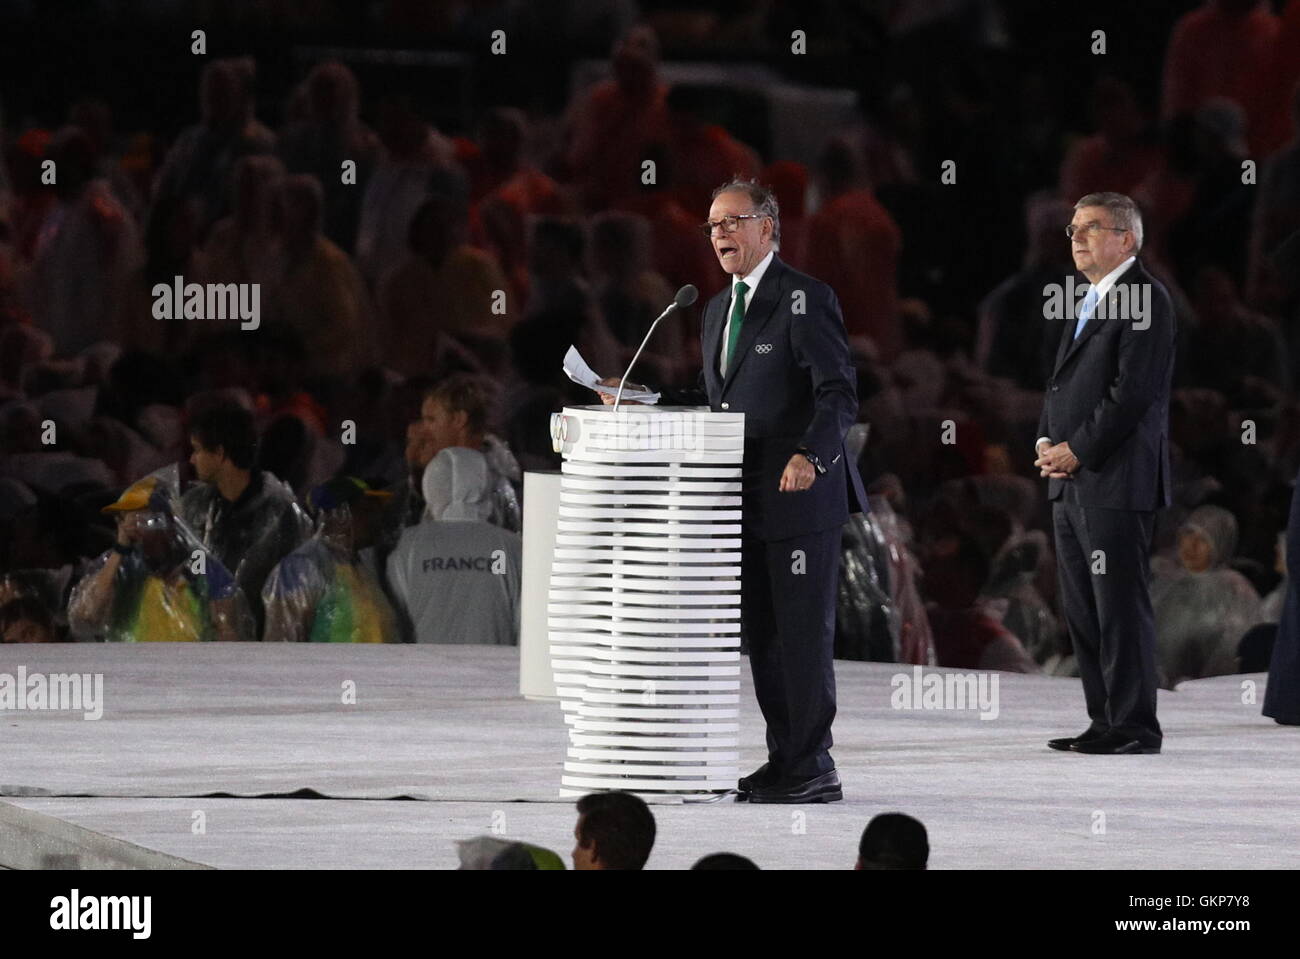 Rio De Janeiro, Brazil. 21st Aug, 2016. The president of the Rio 2016 Organising Committee of the Olympic Games Carlos Arthur Nuzman (L) gives a speech at the Closing Ceremony of the 2016 Rio Olympic Games at Maracana Stadium in Rio de Janeiro, Brazil, on Aug. 21, 2016. Credit:  Zheng Huansong/Xinhua/Alamy Live News Stock Photo